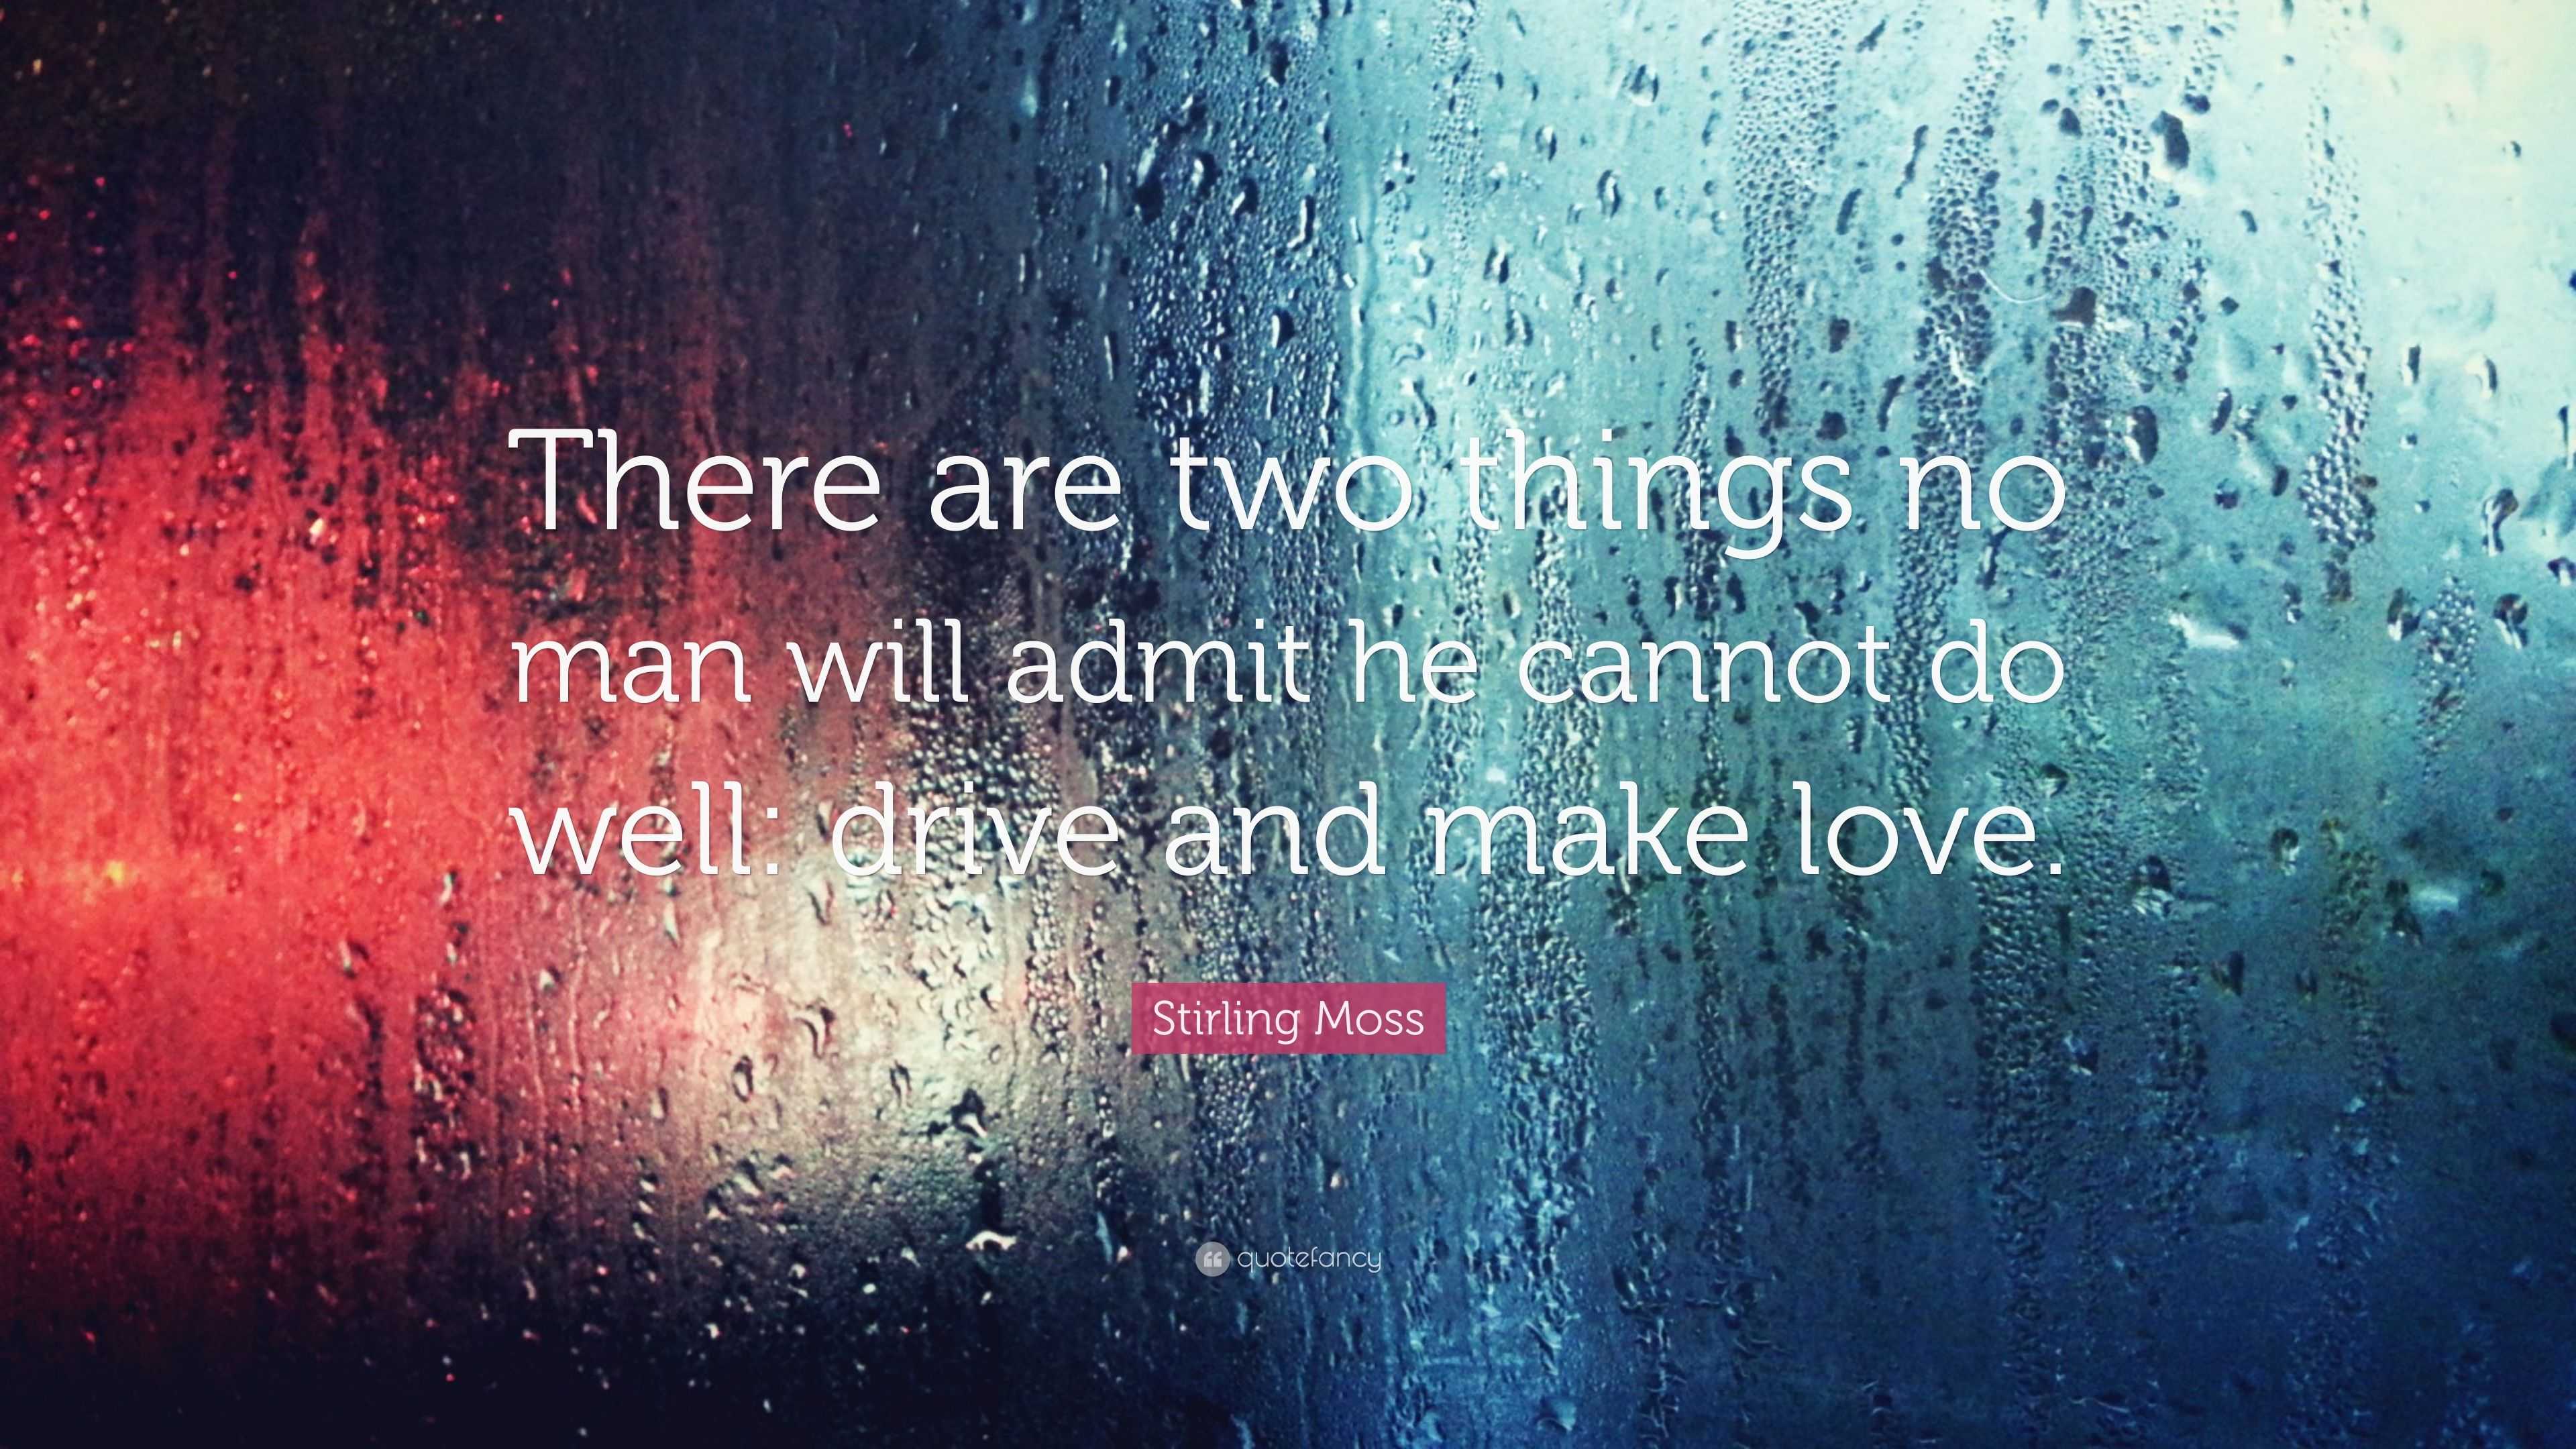 Stirling Moss Quote: "There are two things no man will admit he cannot do well: drive and make ...